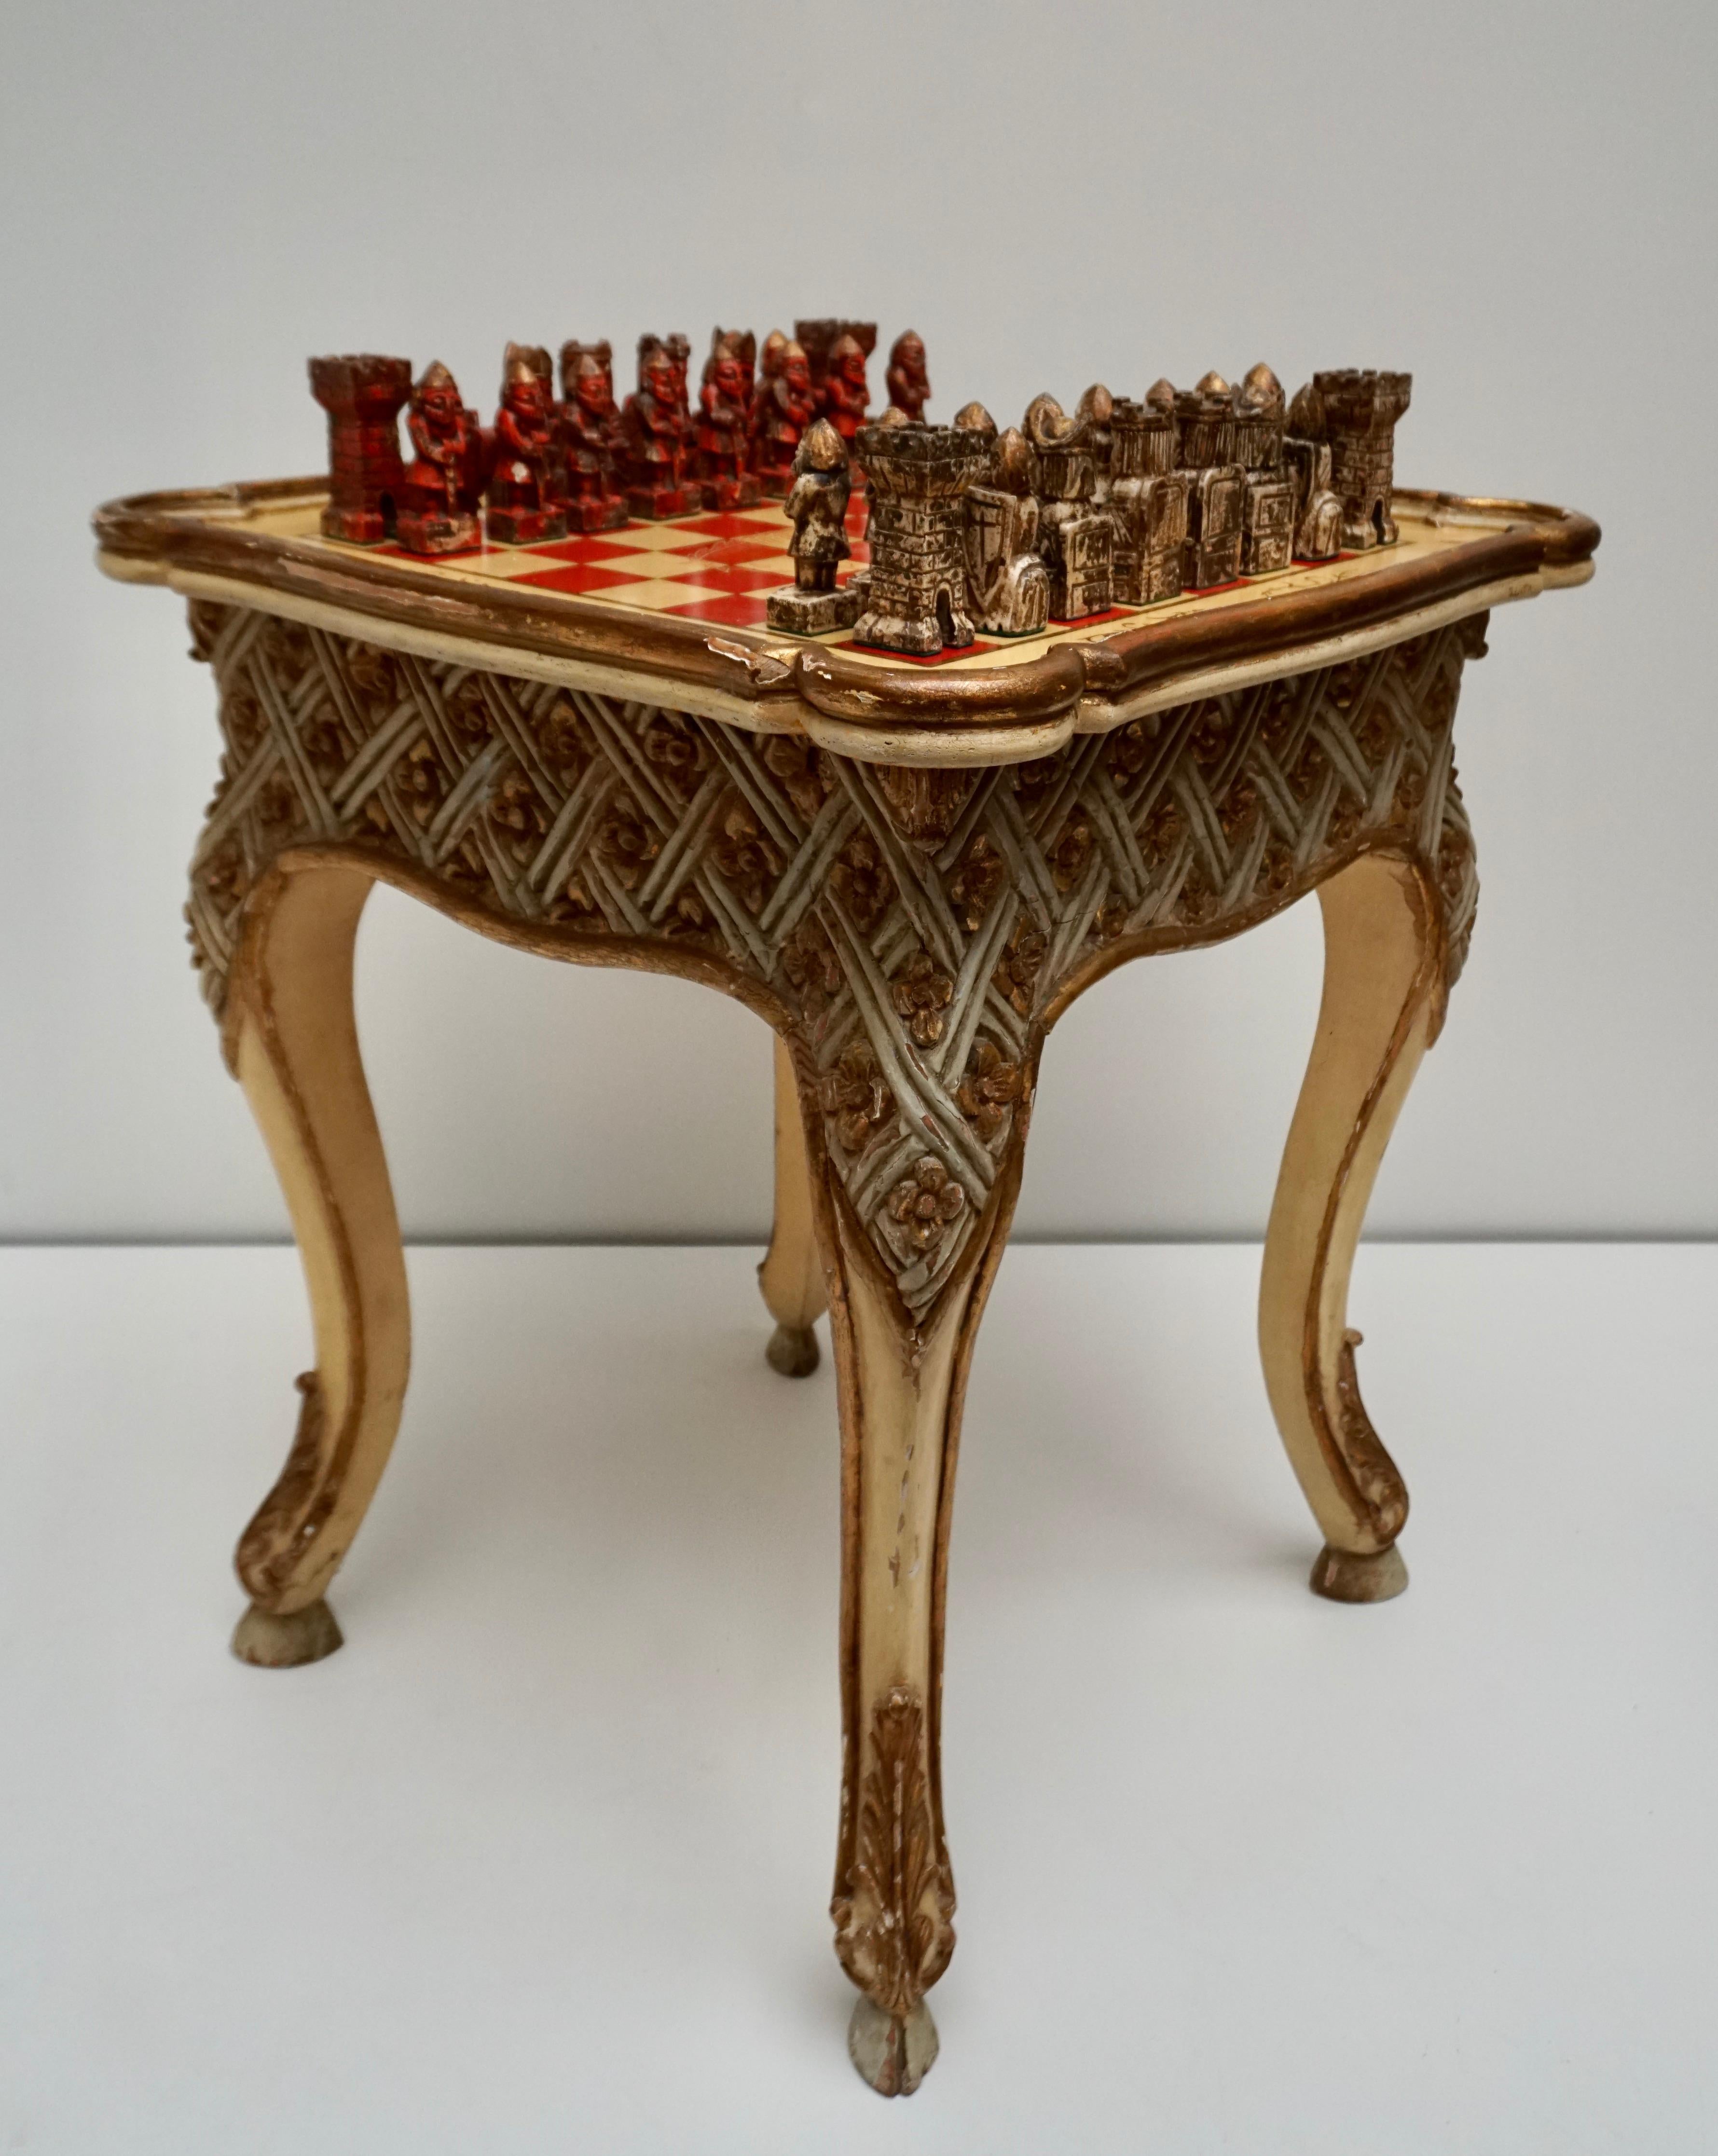 Hand-Carved Games Chess Set of Handcrafted and Painted Wood Pieces with Table and Board For Sale